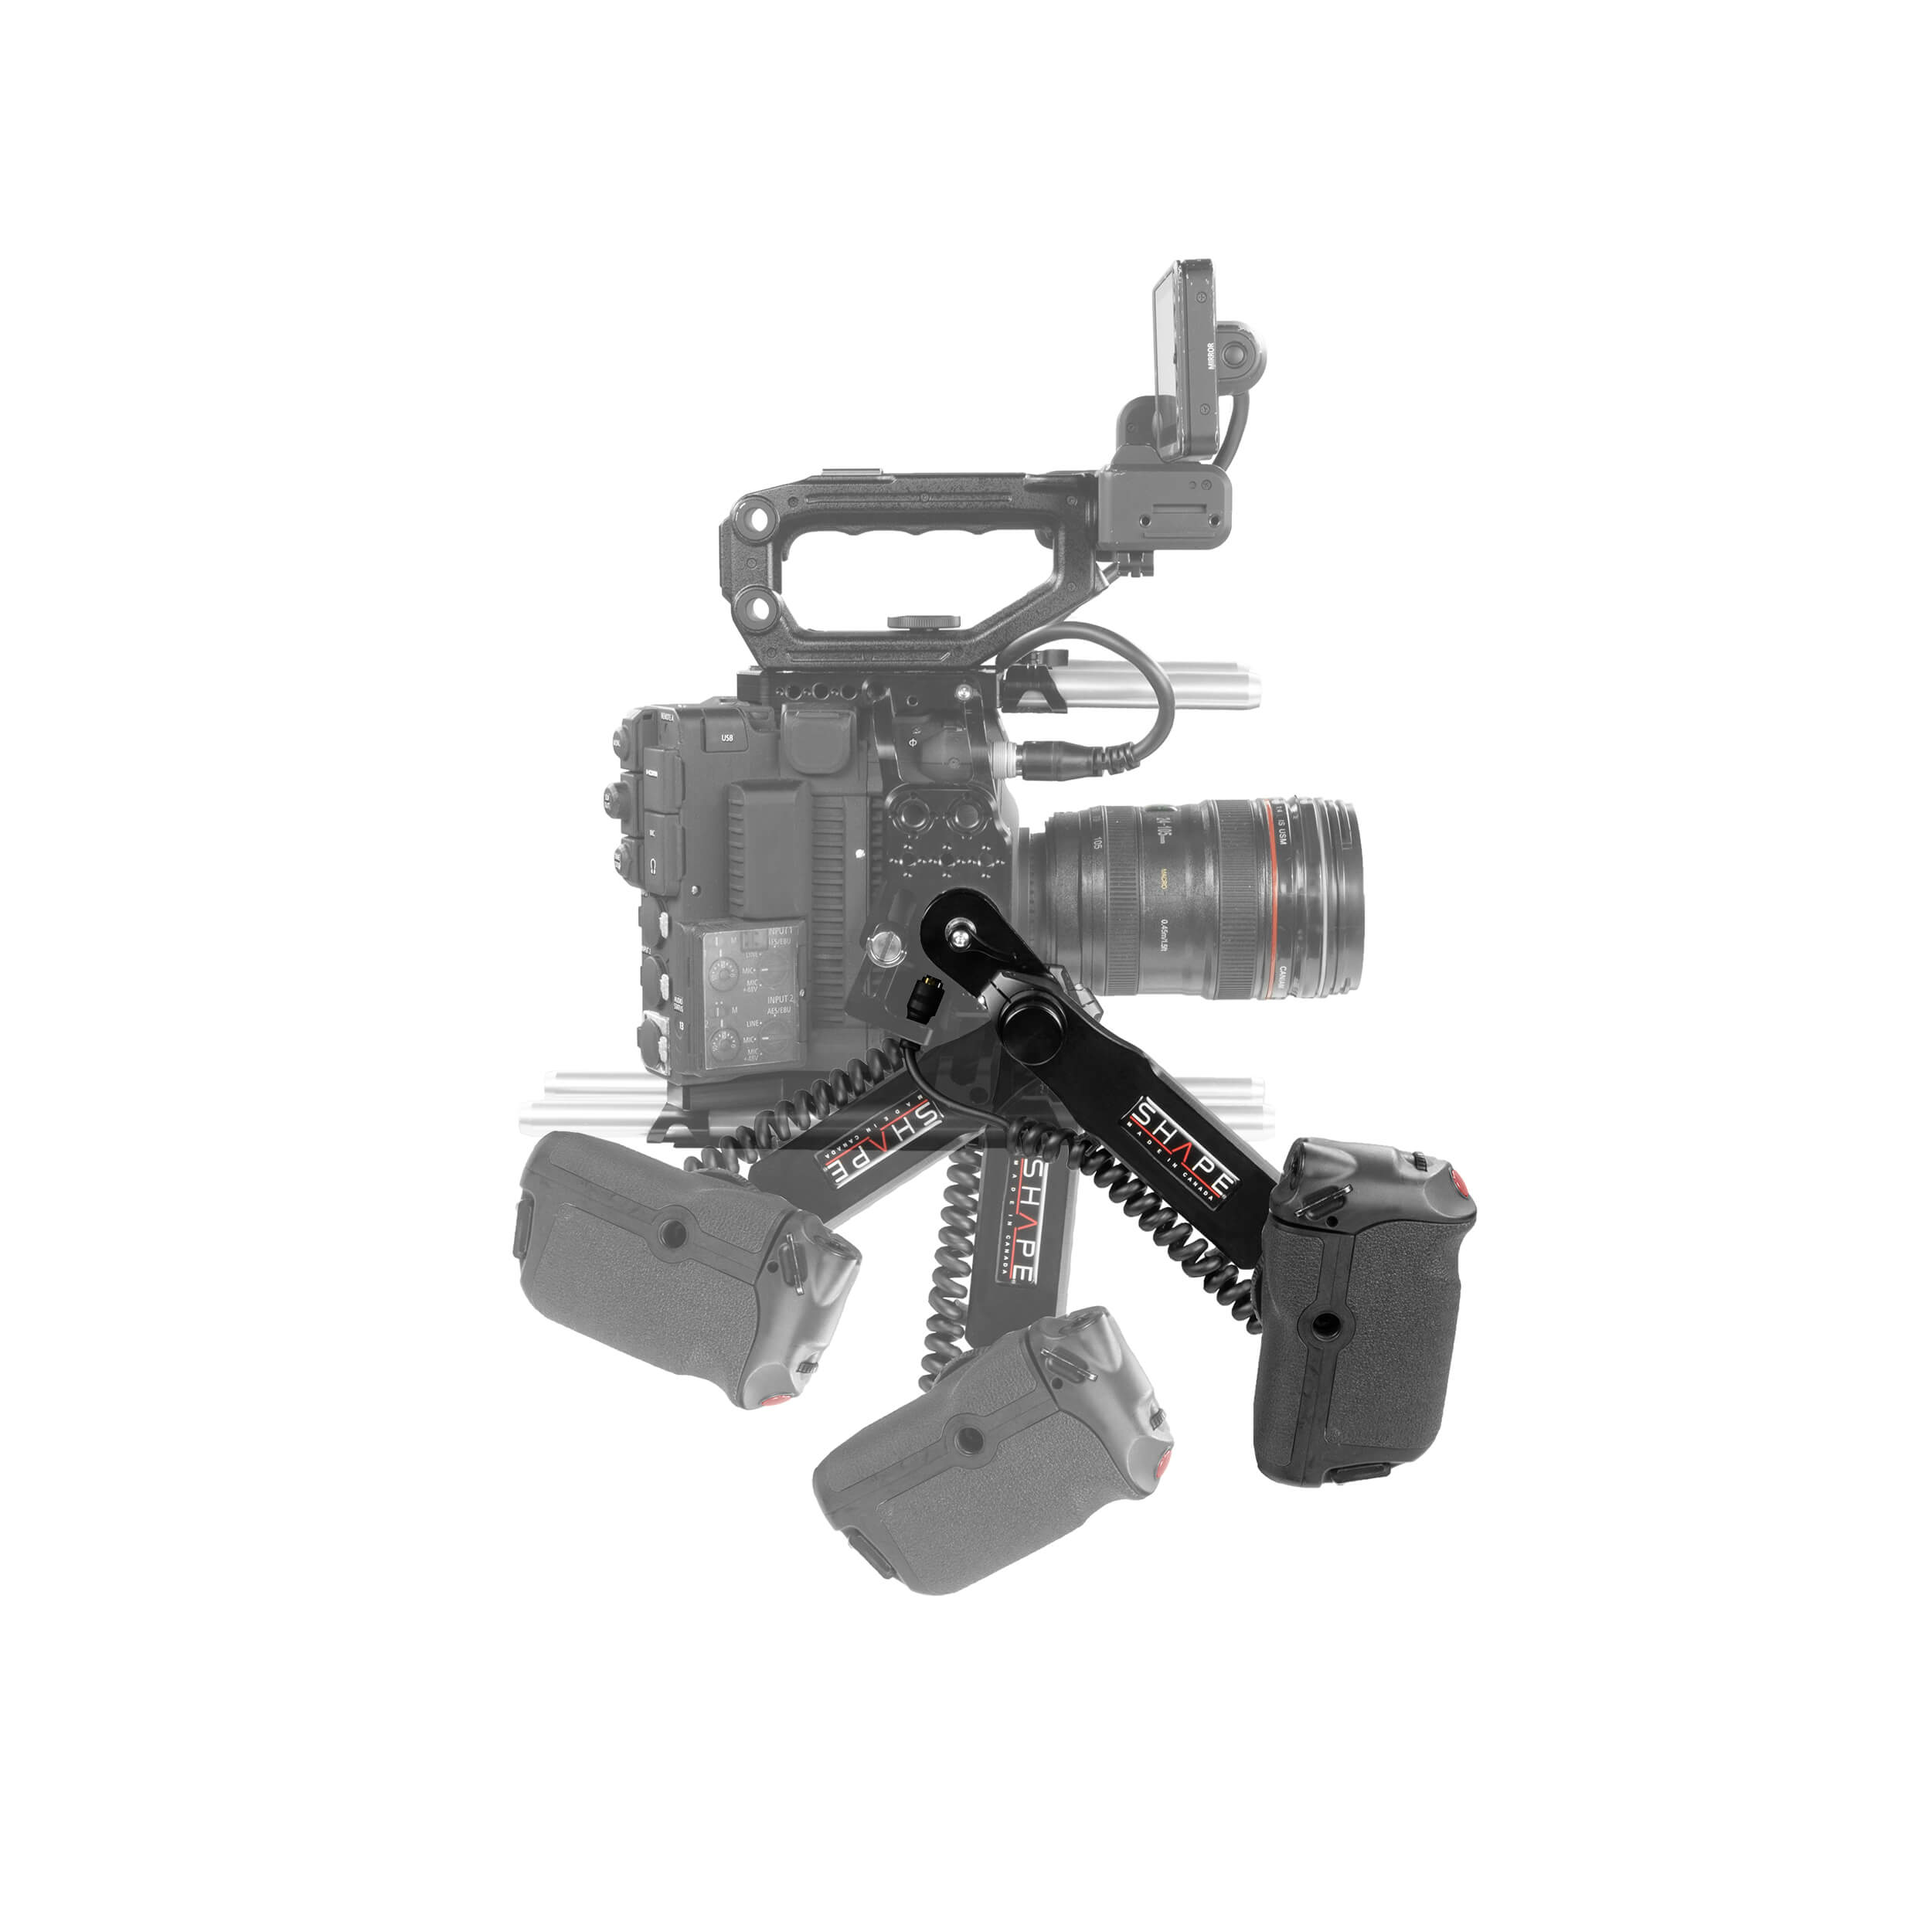 SHAPE Canon C500 Mark II Remote Extensions Handle with Cable